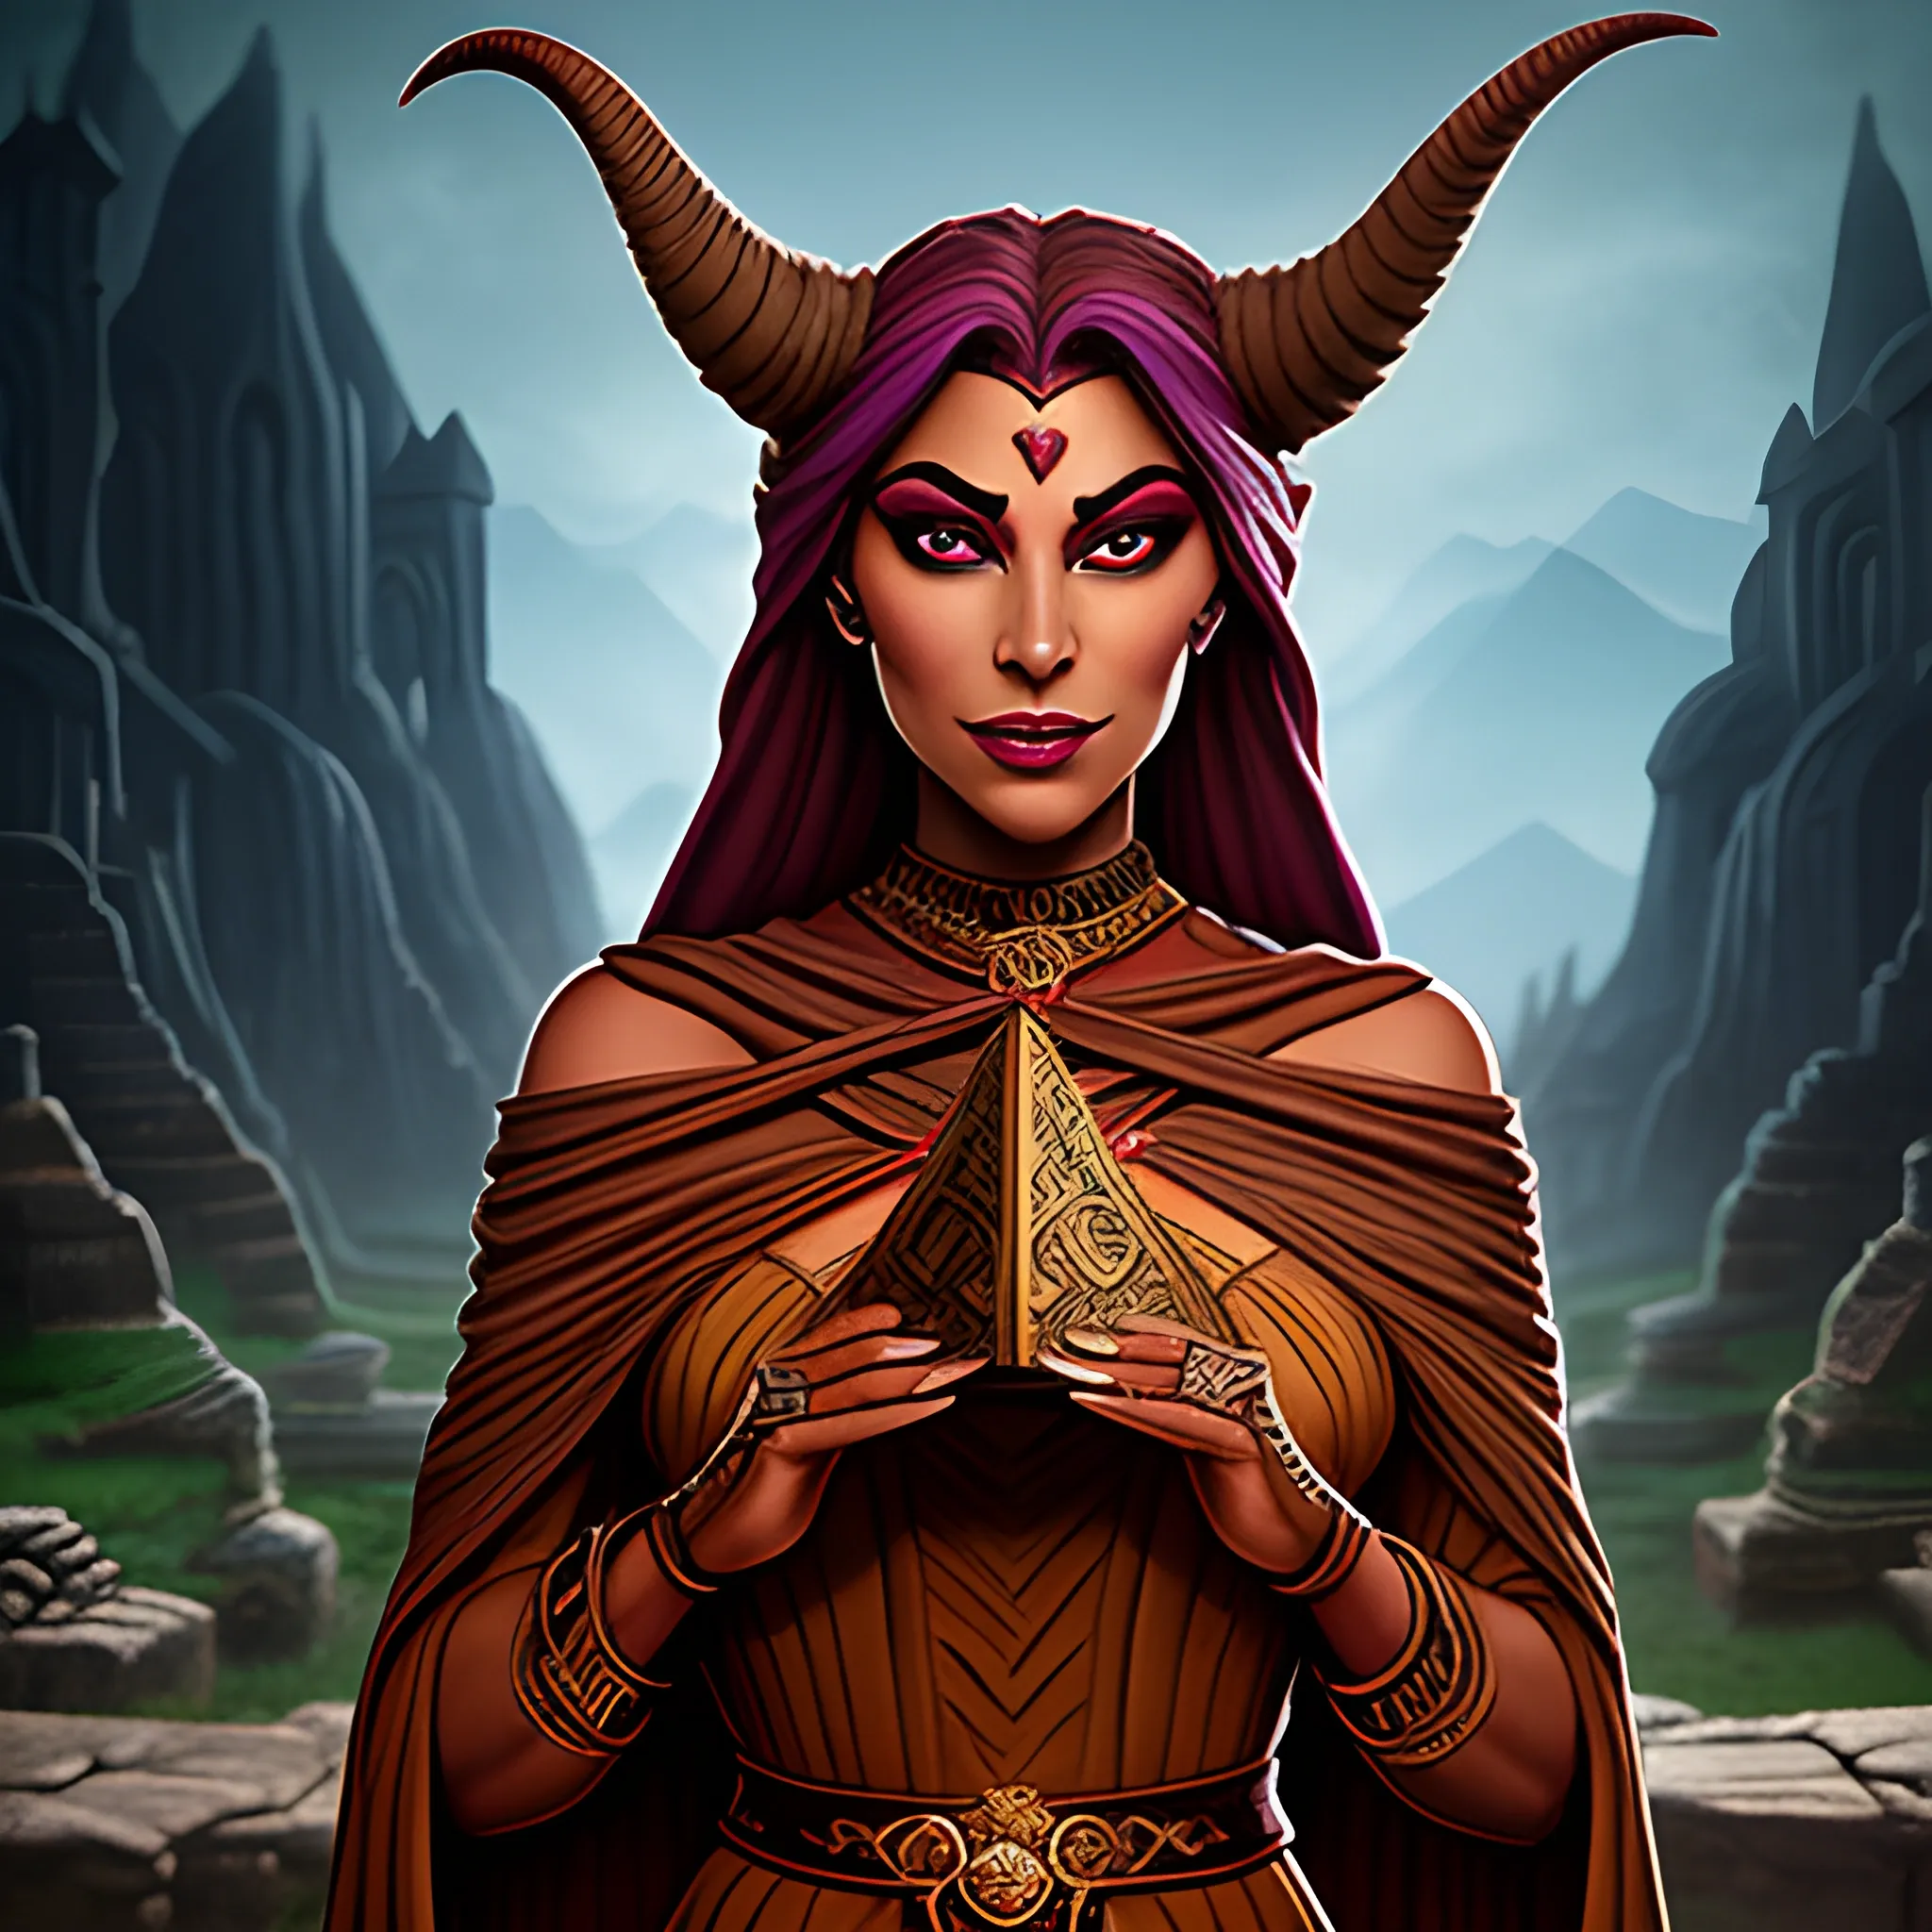 Sarai the Storyteller: Sarai, a mysterious tiefling with captivating eyes, spends her days telling ancient tales and legends to the village children. She weaves magical stories that transport the listeners to distant lands and forgotten times, leaving them wide-eyed and filled with wonder.